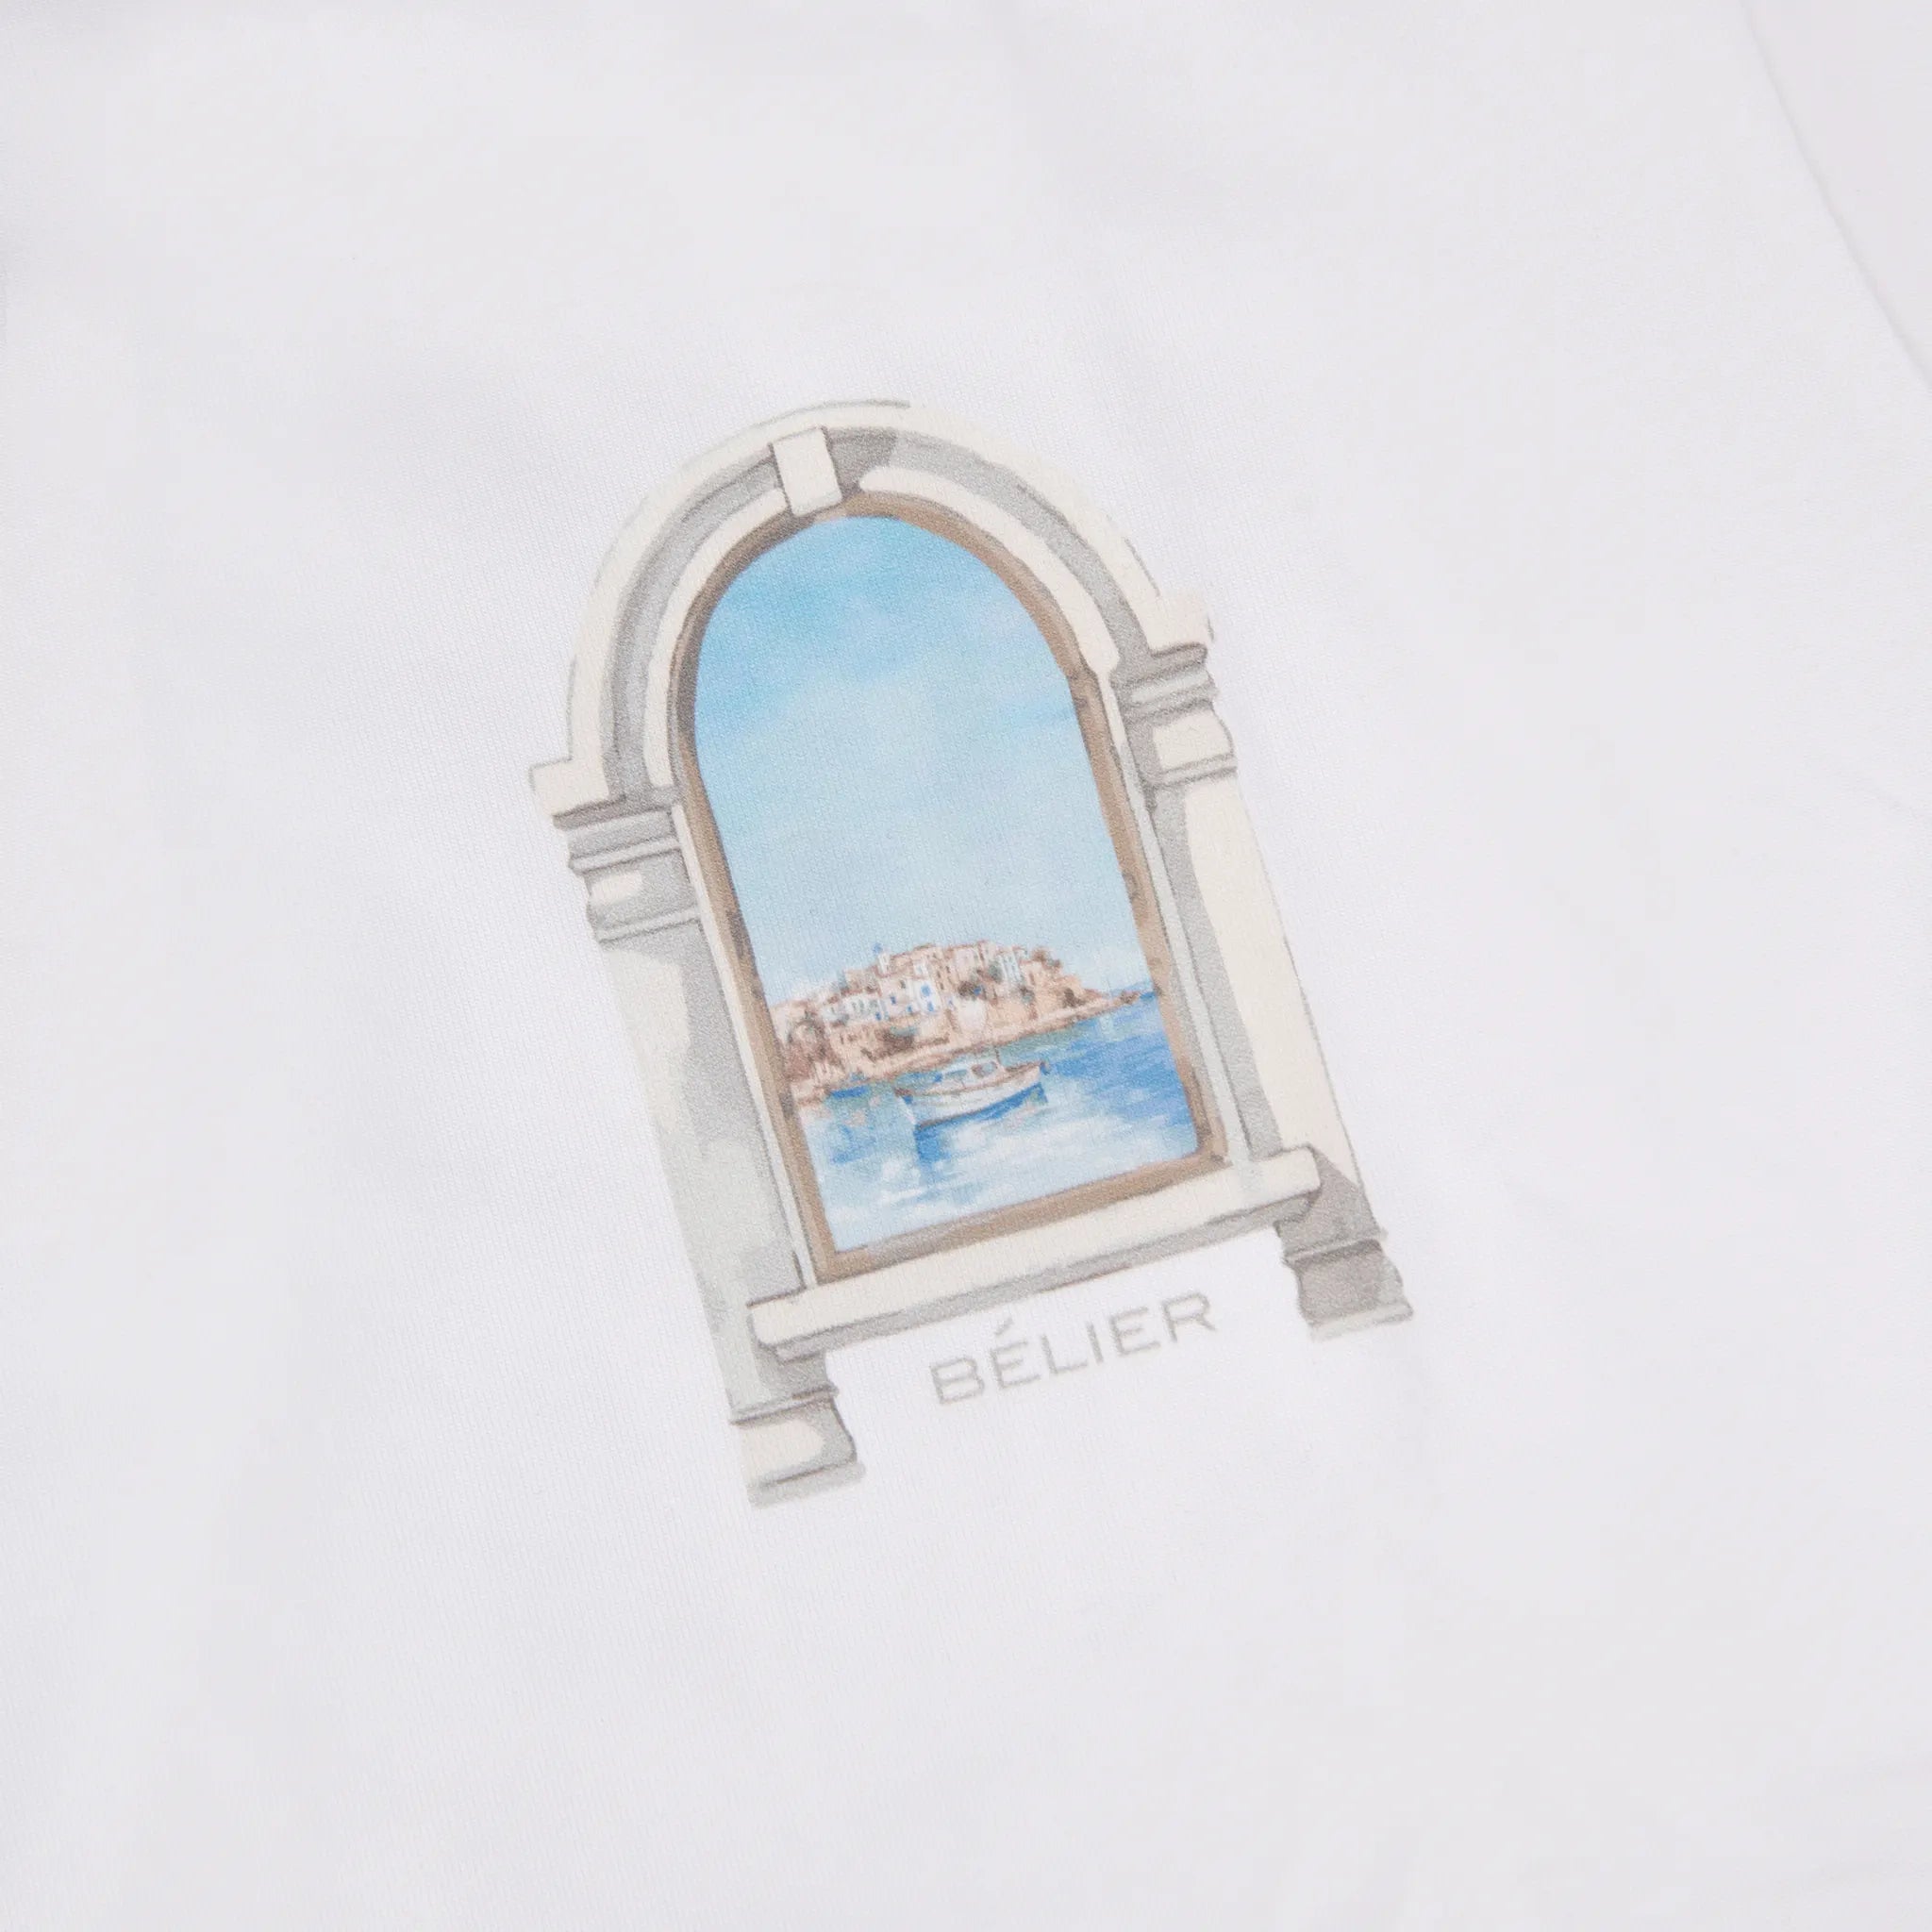 Detail view of Belier Arch View White T Shirt BM-214